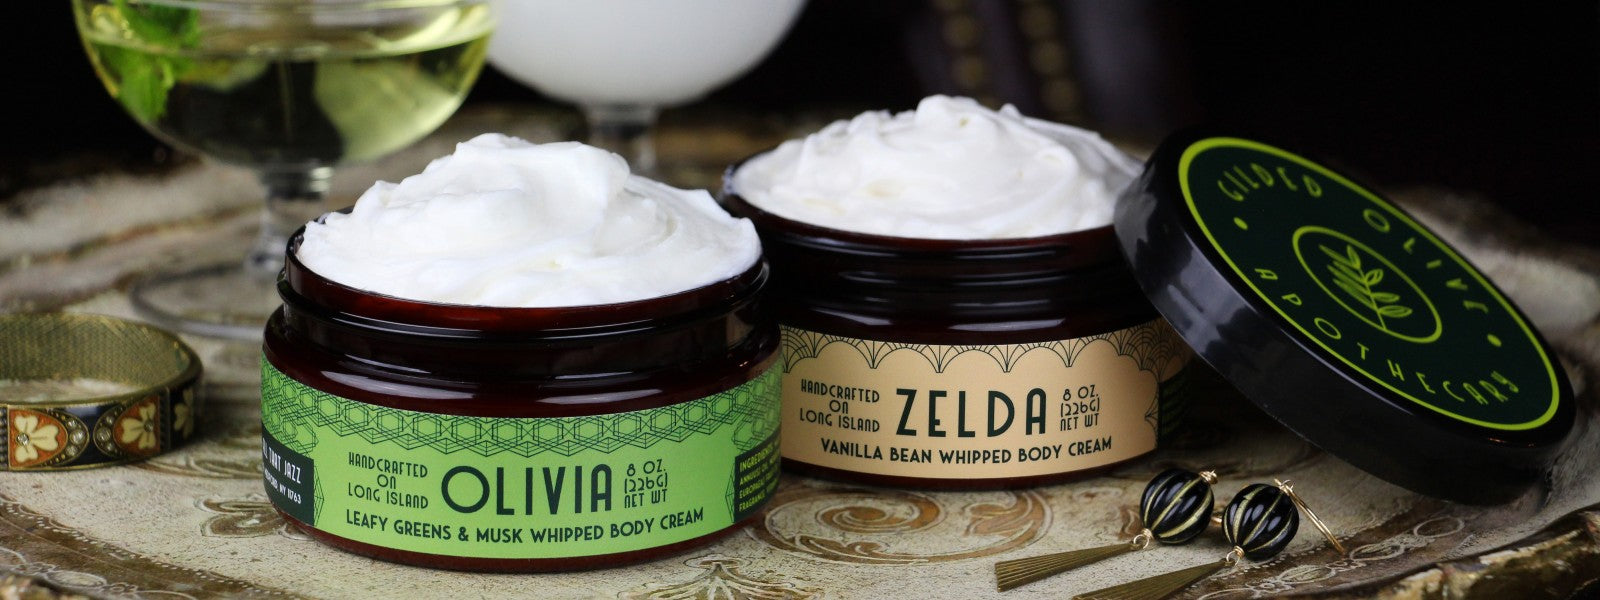 Whipped Body Cream Gilded Olive Apothecary